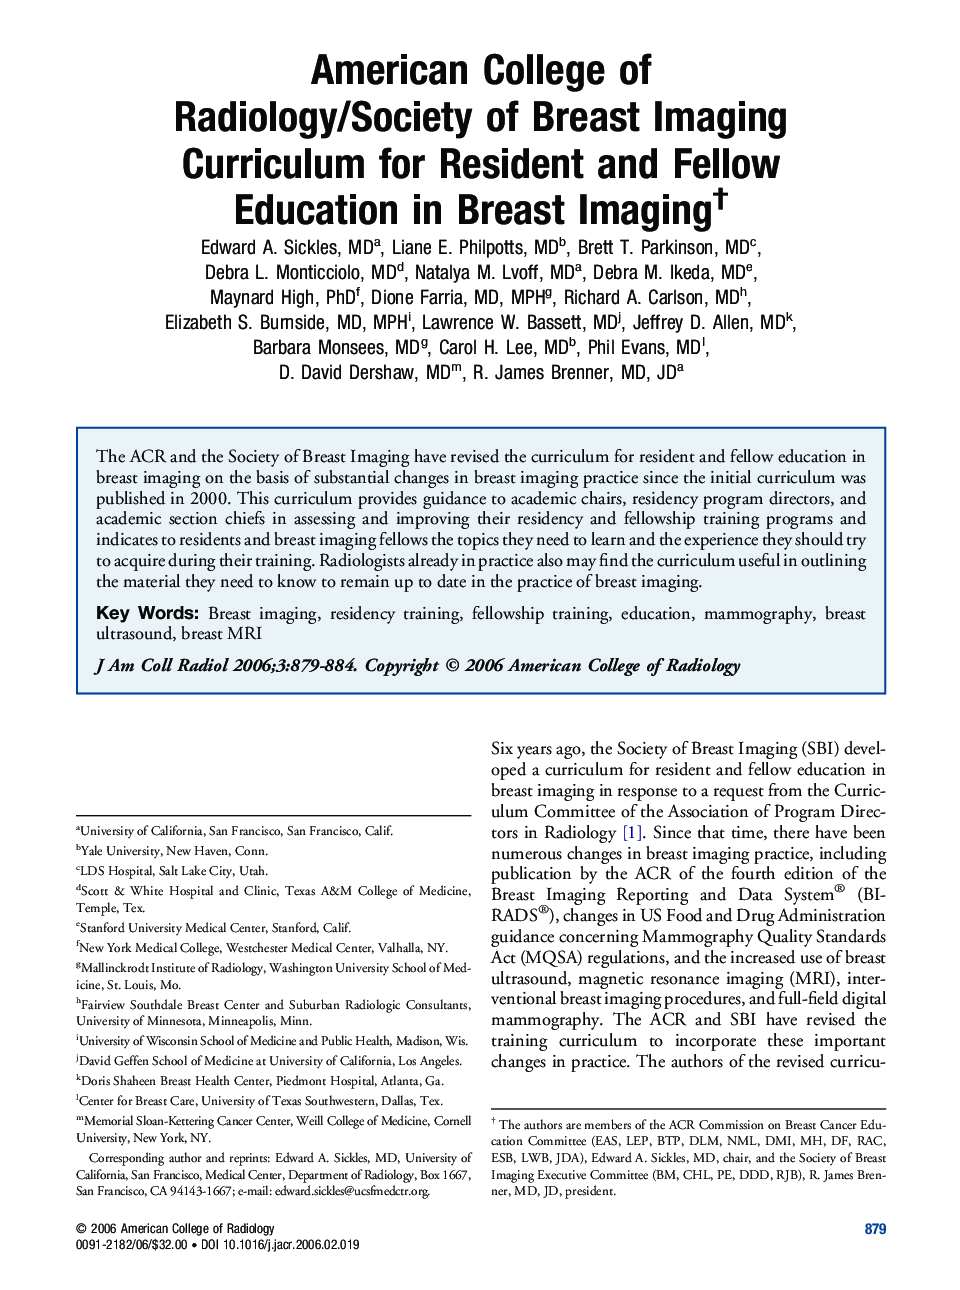 American College of Radiology/Society of Breast Imaging Curriculum for Resident and Fellow Education in Breast Imagingâ 